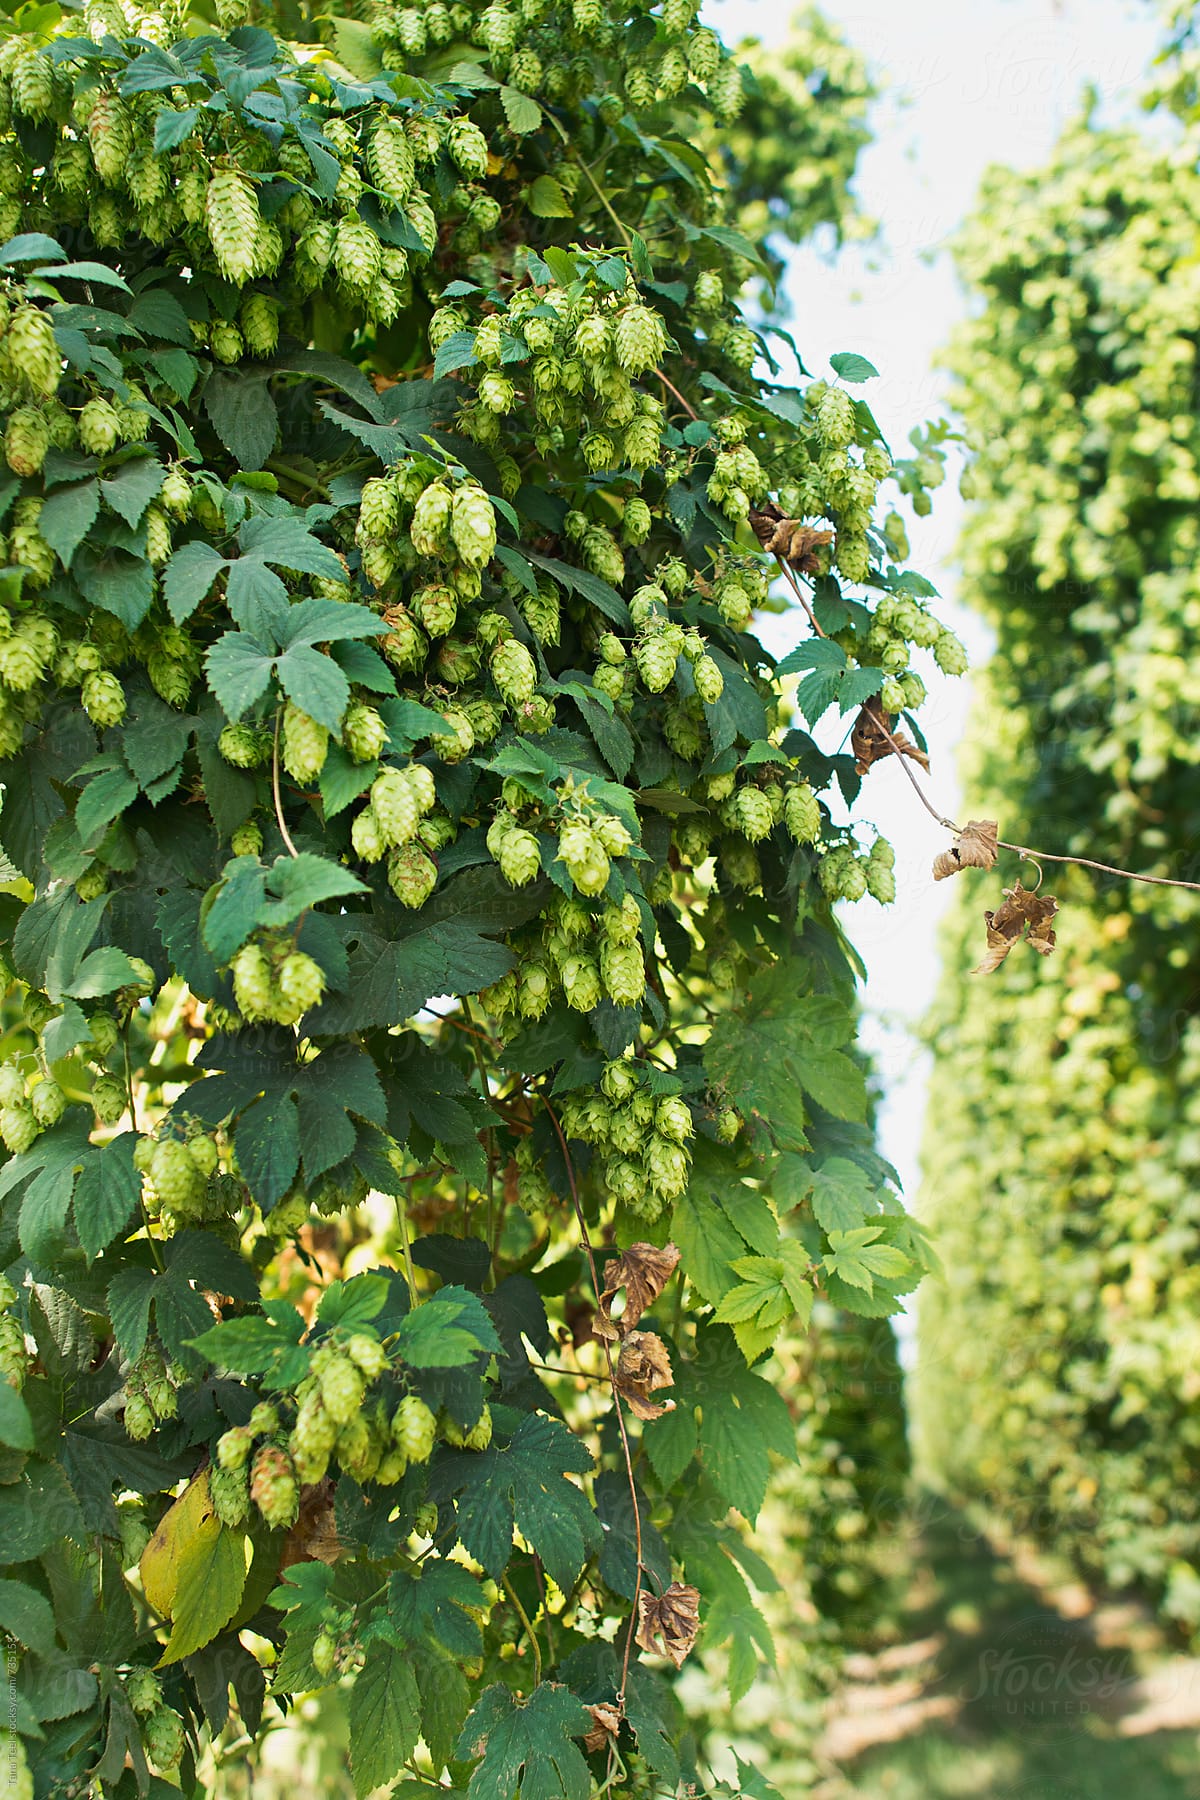 Rows of hop plants